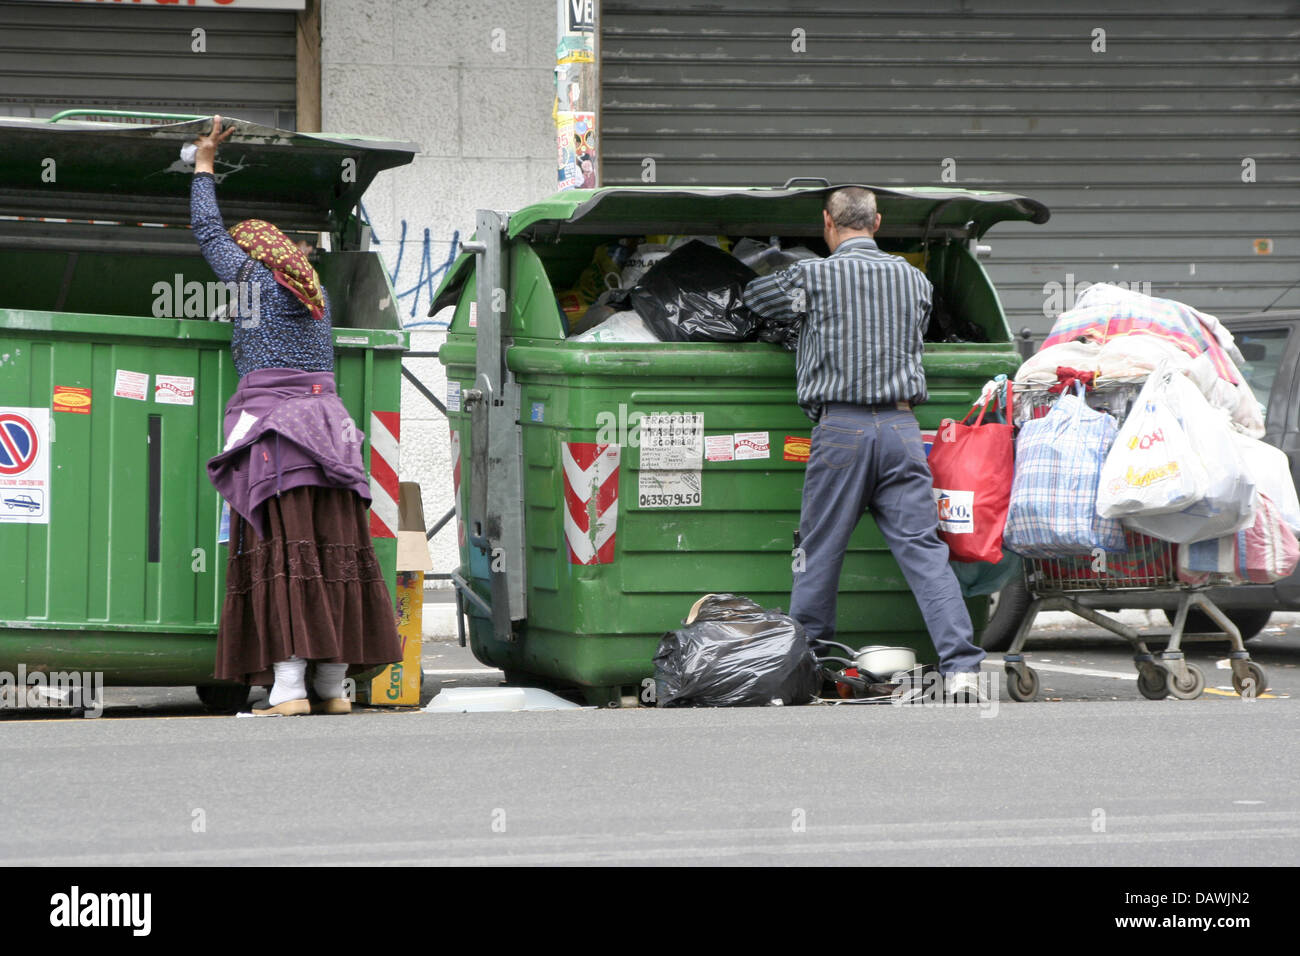 a-man-and-a-woman-rummage-through-rubbish-containers-in-rome-italy-DAWJN2.jpg